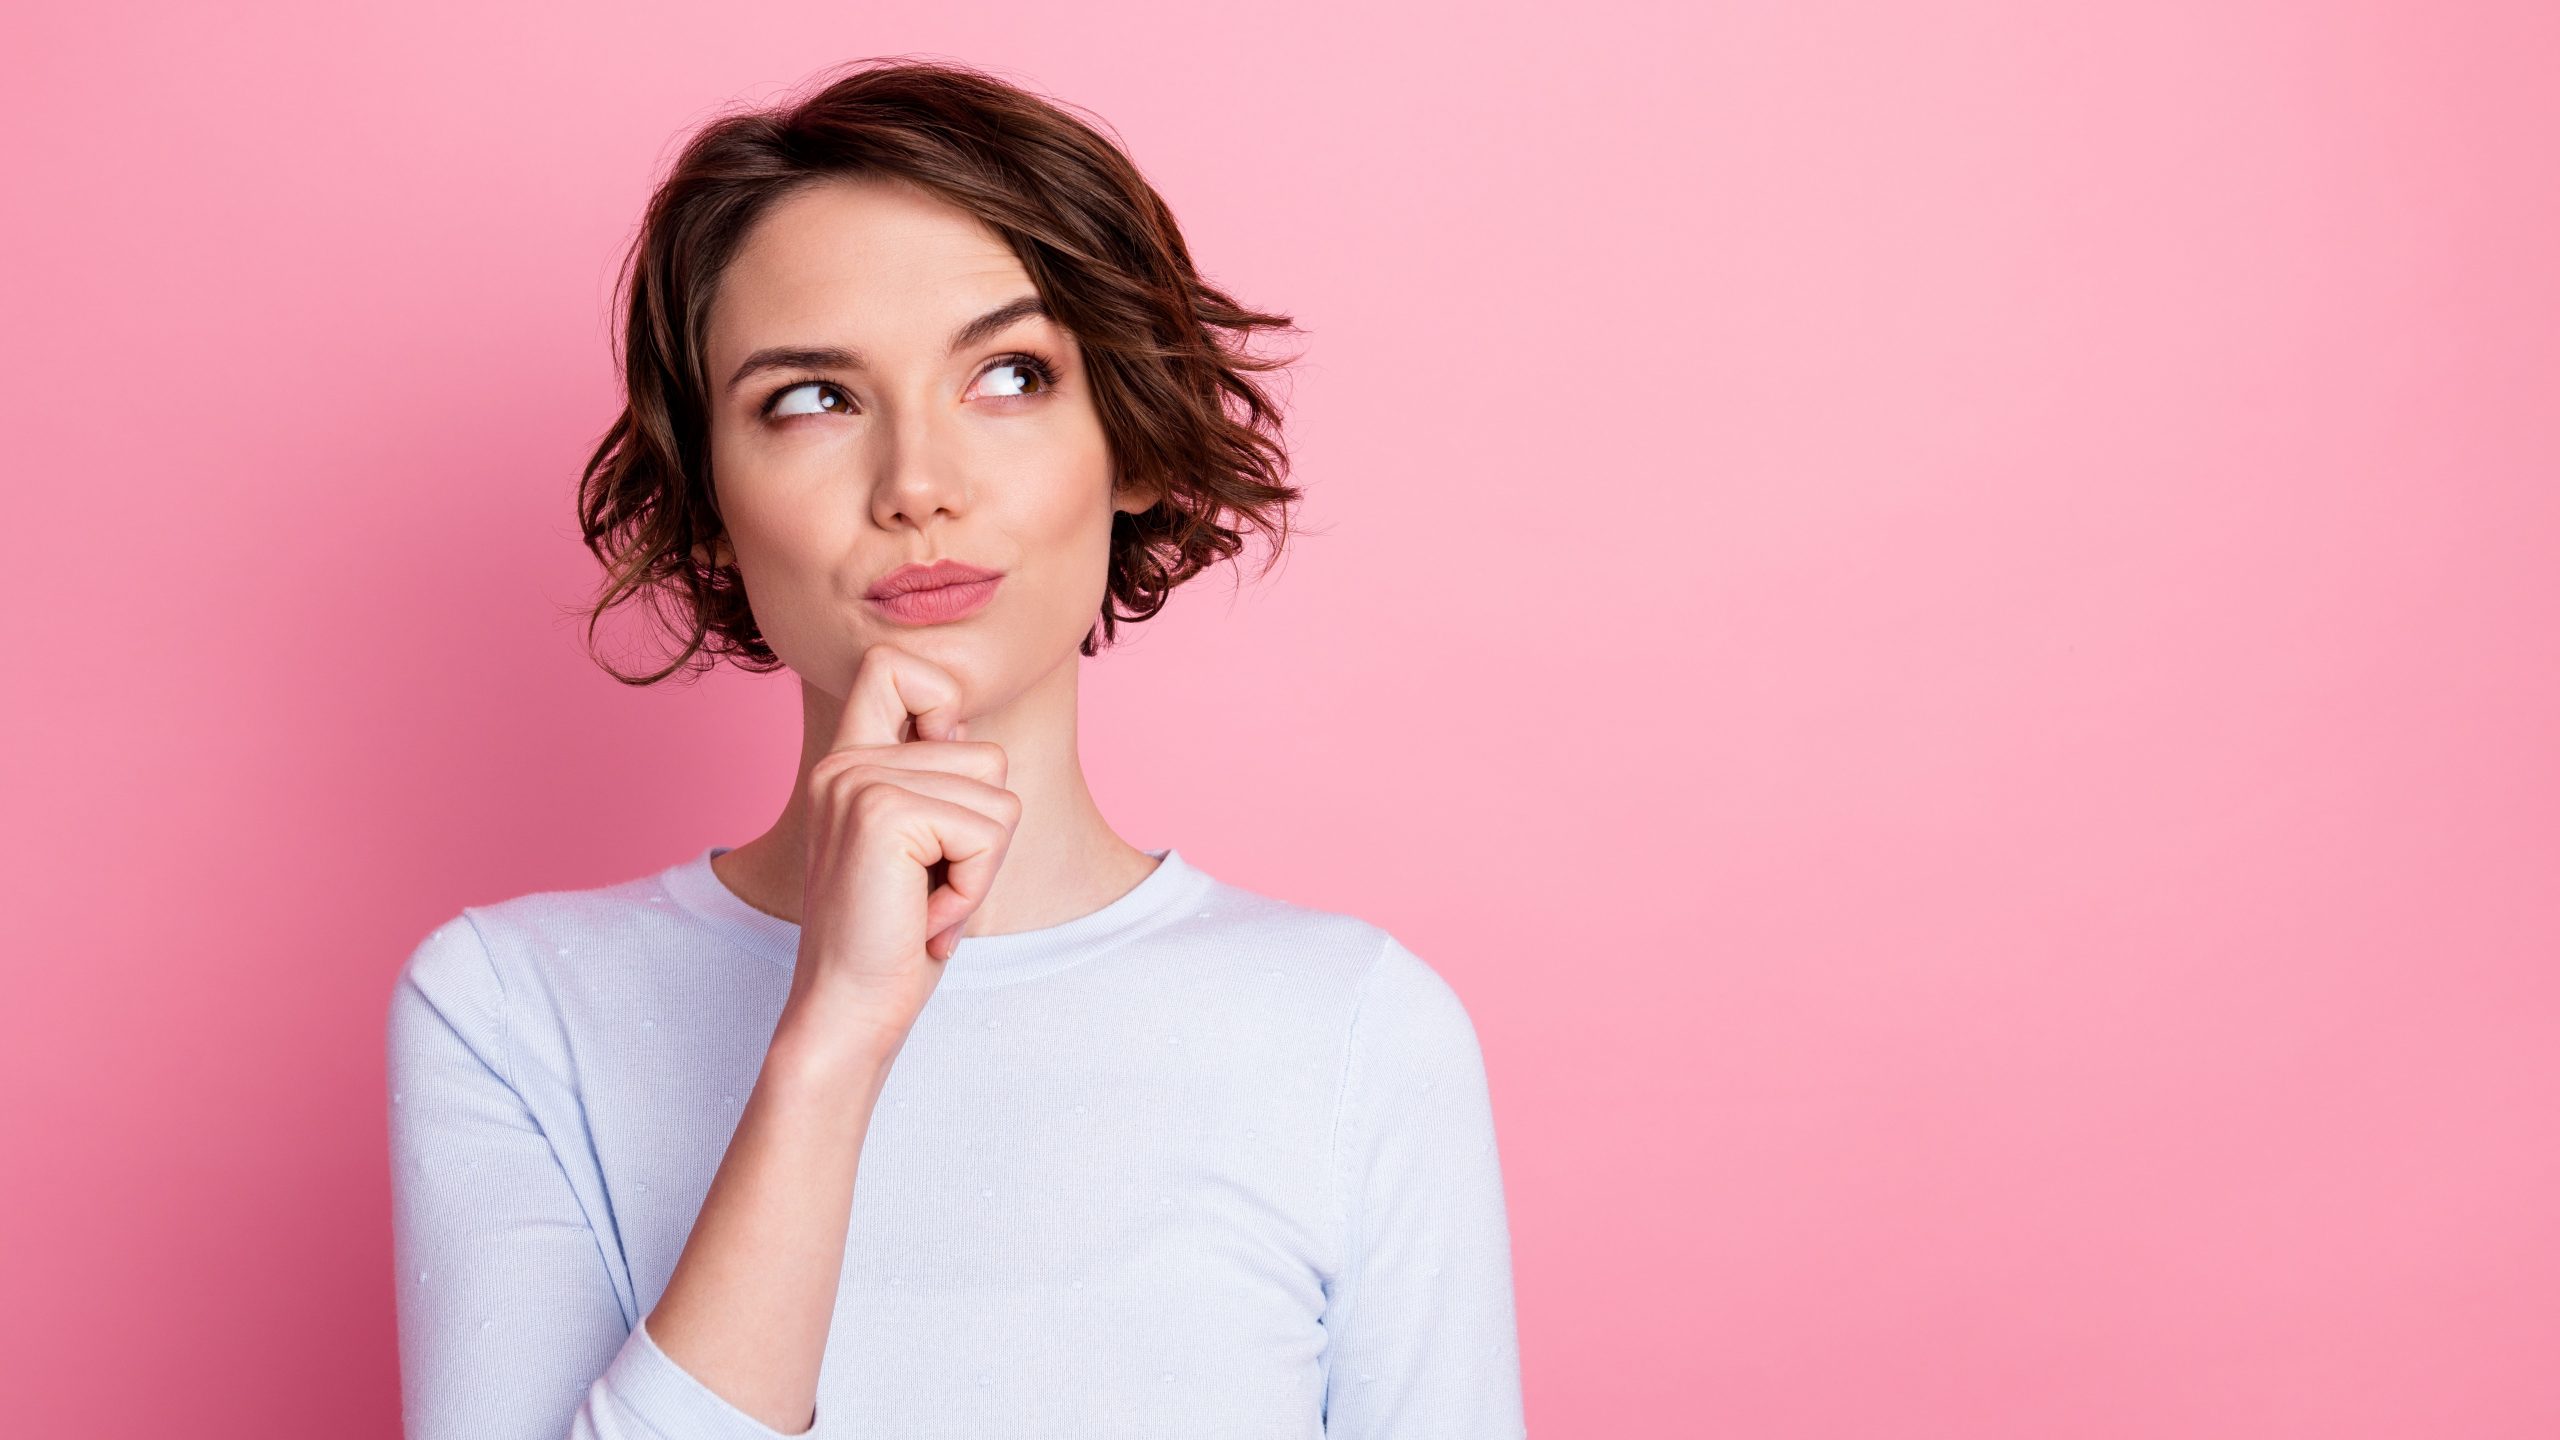 Woman wonders in front of a pink background